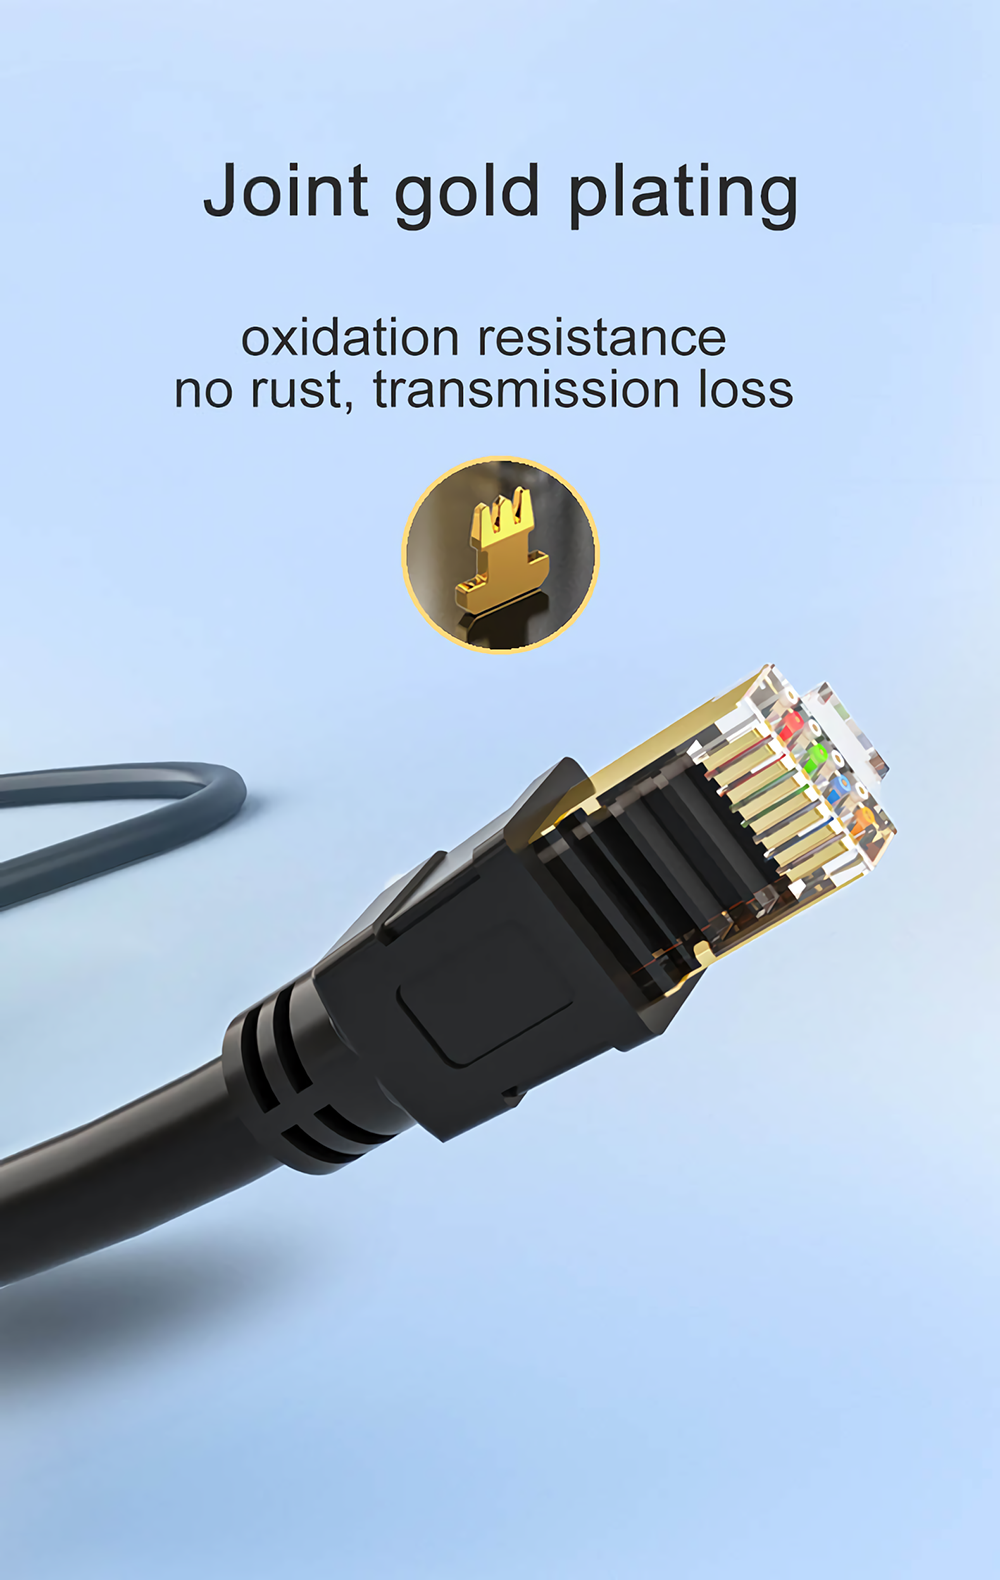 ACASIS-AC-NW01-Cat-8-Ethernet-Cable-SFTP-40Gbps-RJ45-Cat-8-Network-Cable-Gold-Plated-Connector-For-L-1836814-5